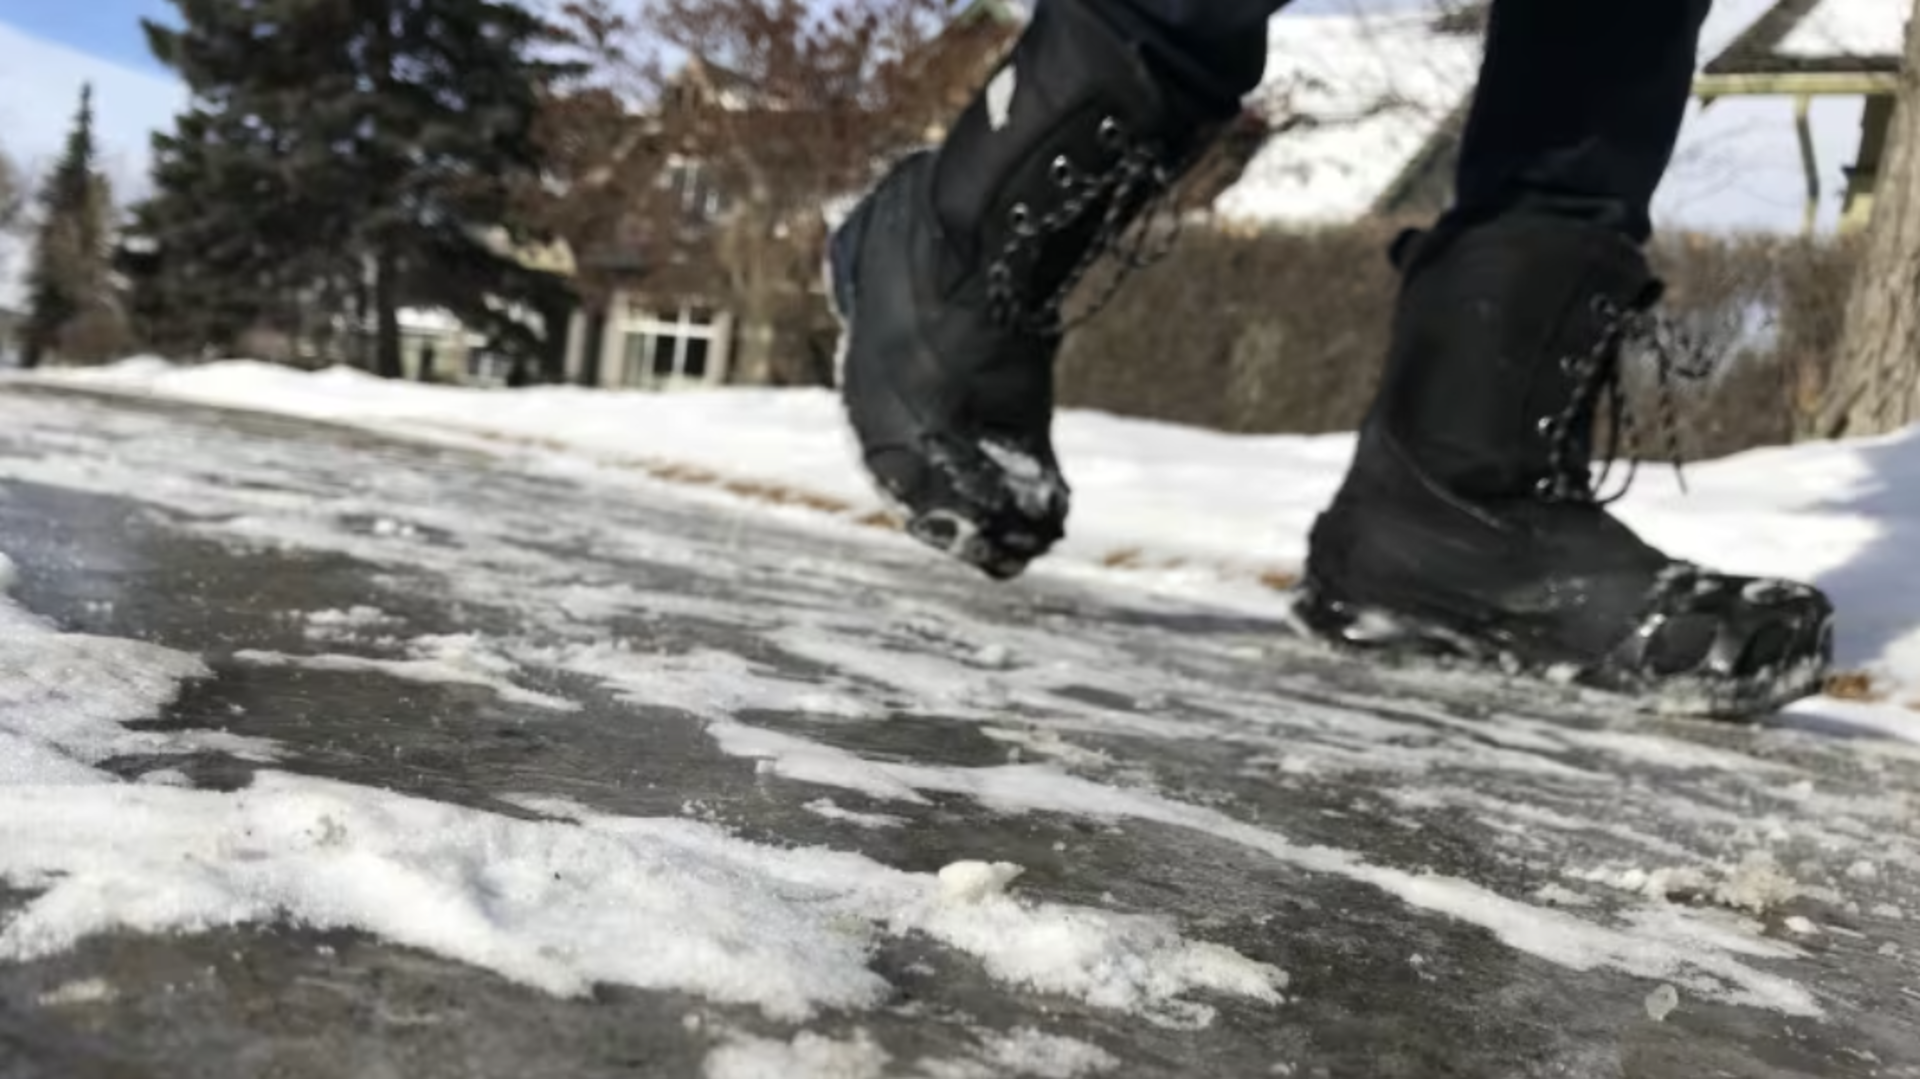 Calgary researcher looks to build warning tool to prevent falls on ice